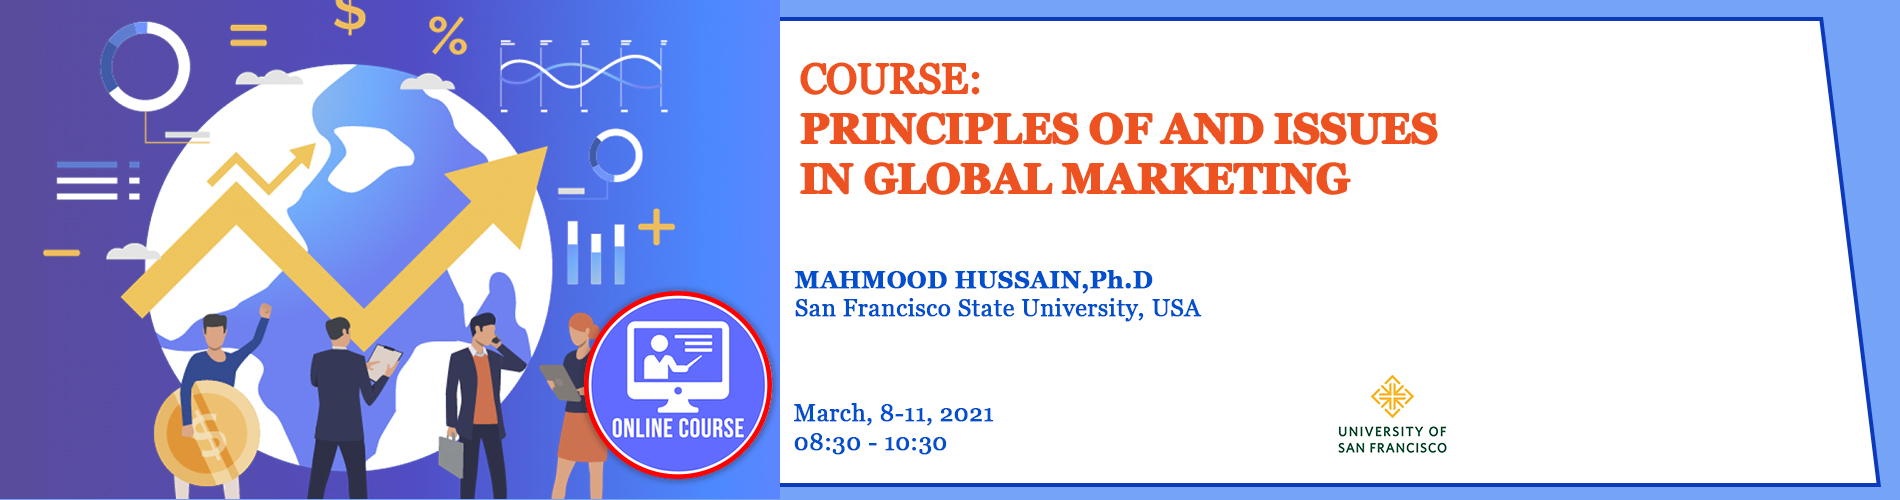 2021.03.08- 2021.03.11 - Principles of and Issues in Global Marketing